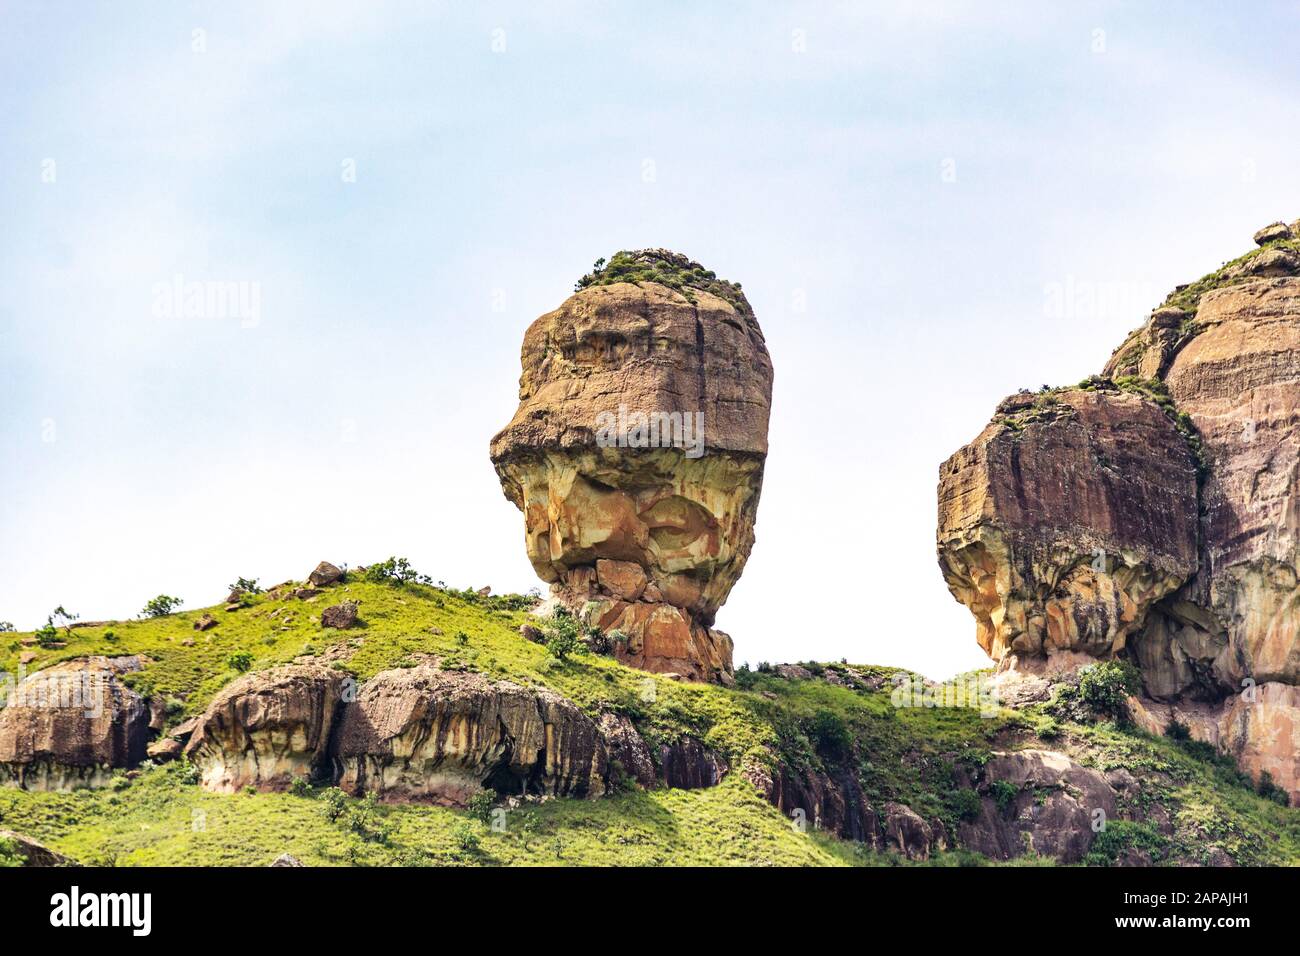 View to the rock formation Policeman's Helmet, Drakensberg mountains, Royal Natal National Park, South Africa Stock Photo